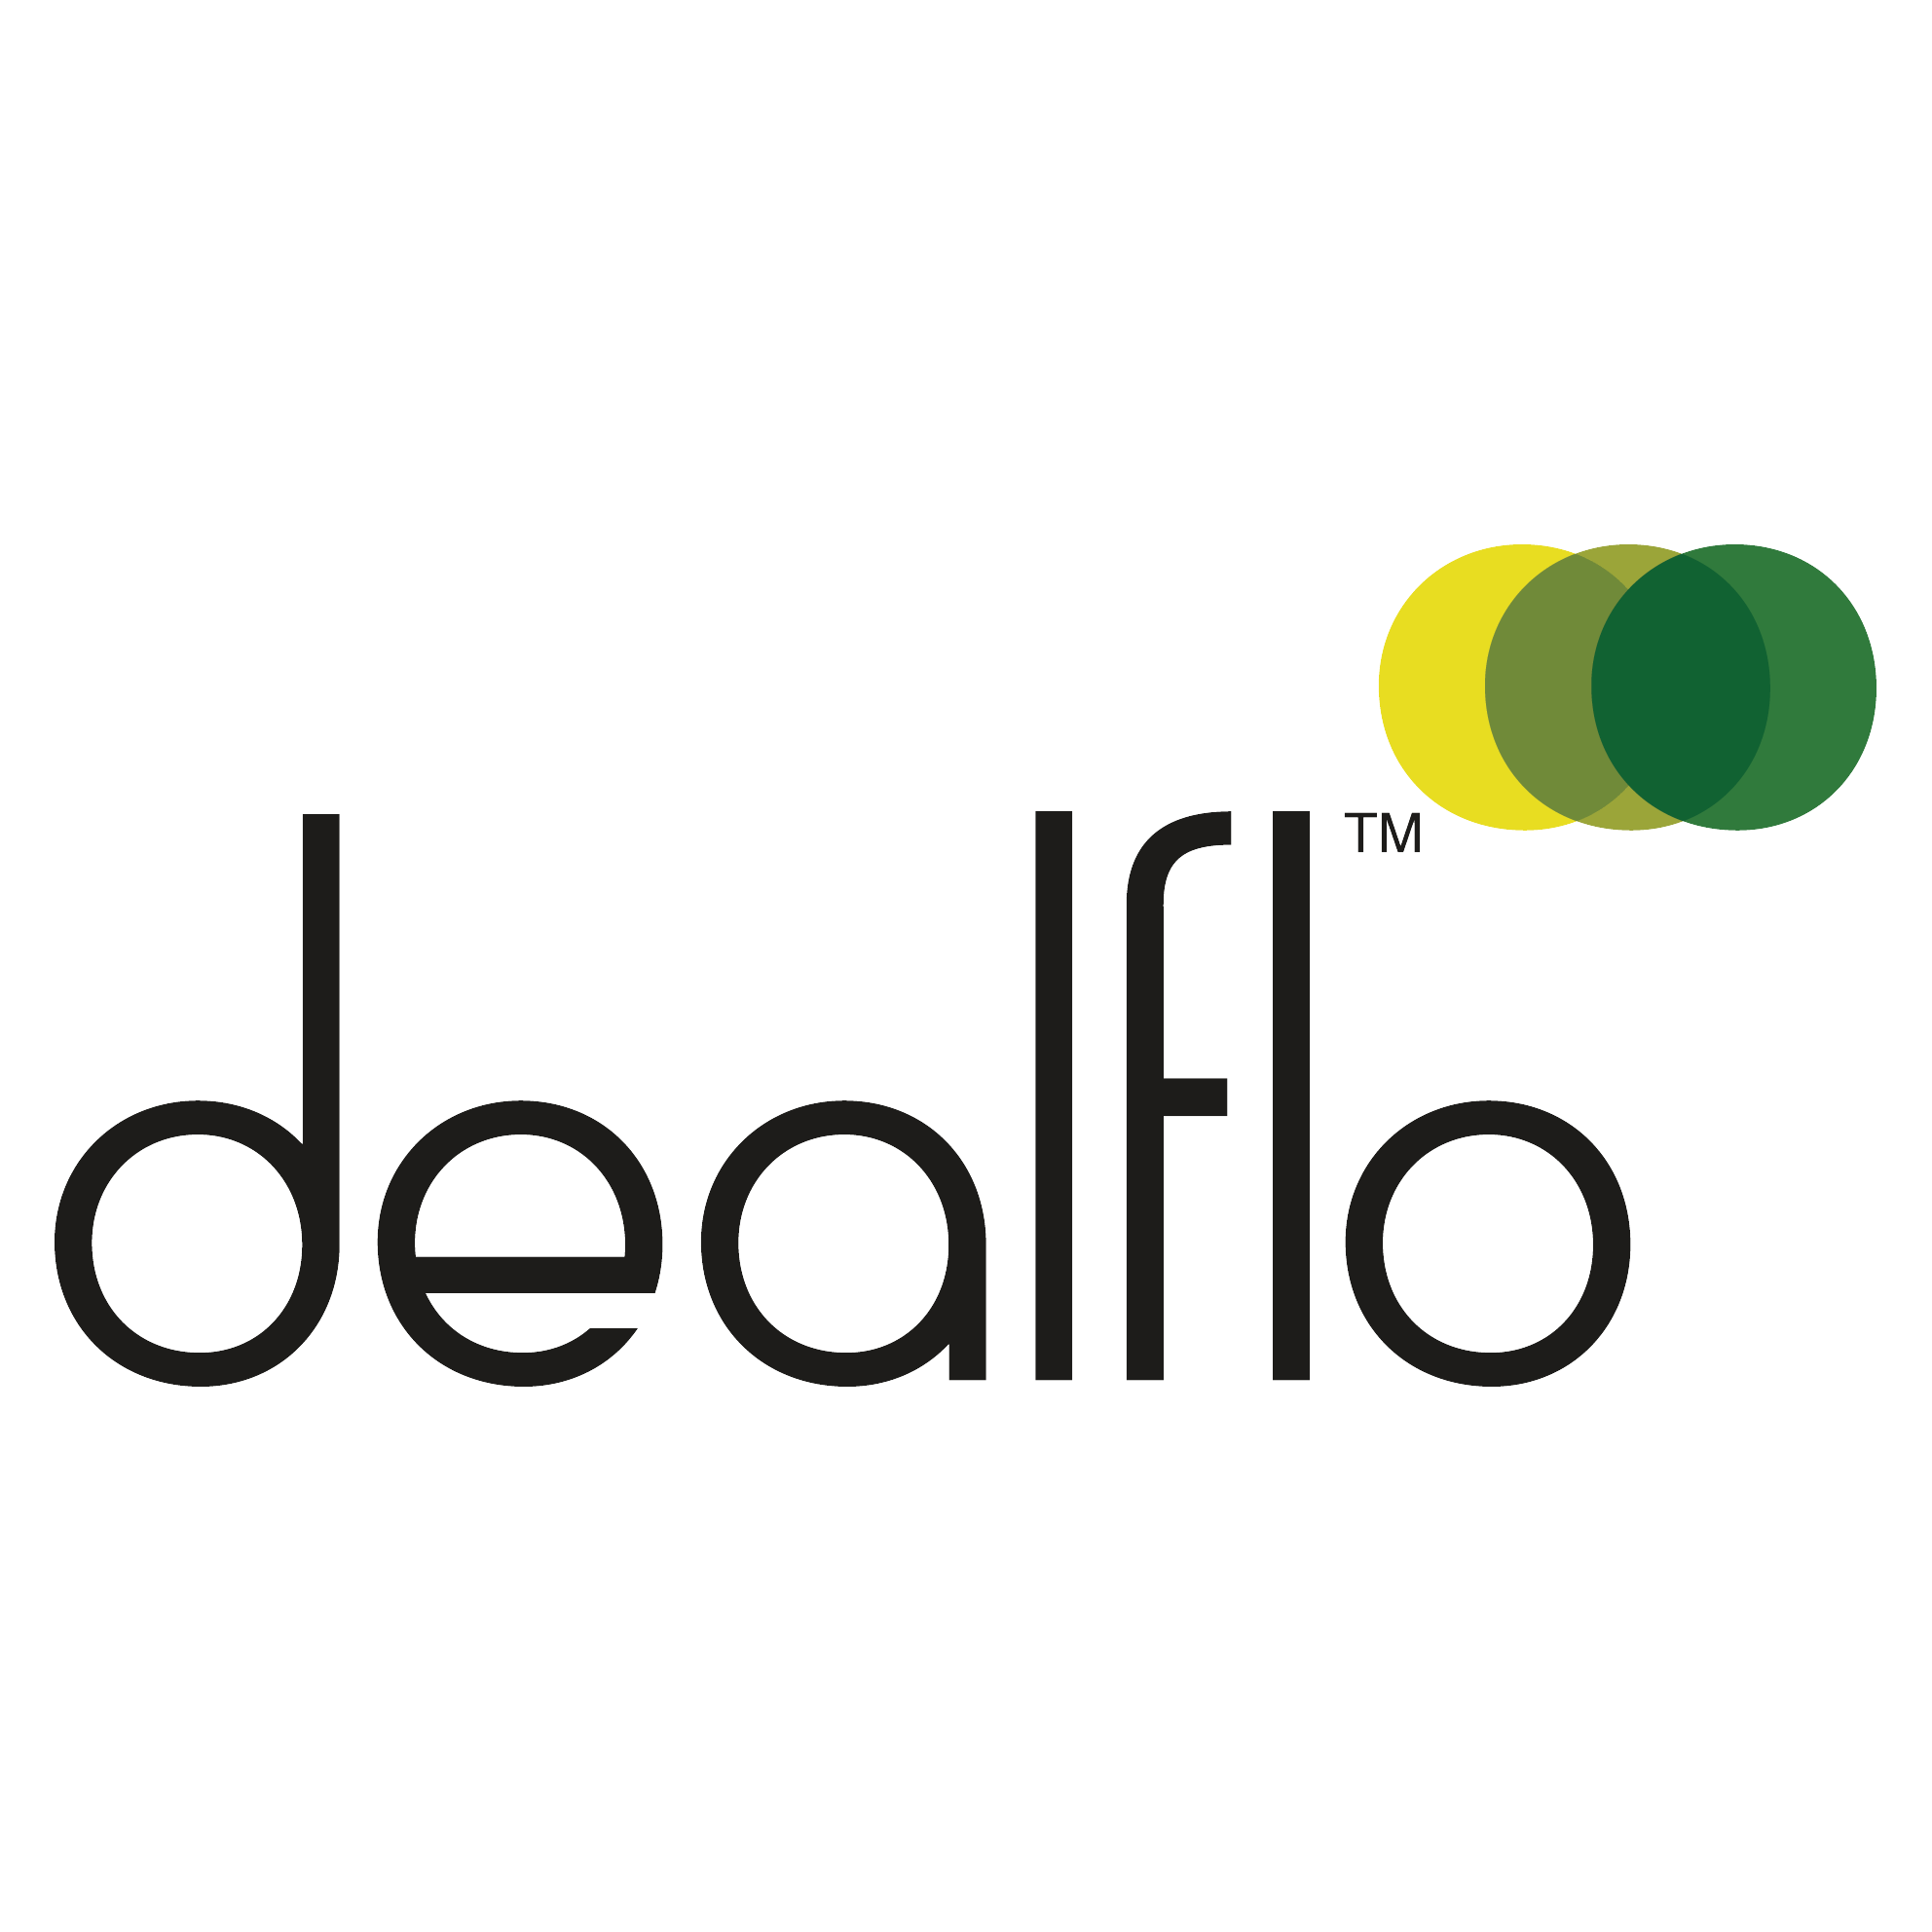 Leasing and motor finance tech firm Dealflo bought for £41m